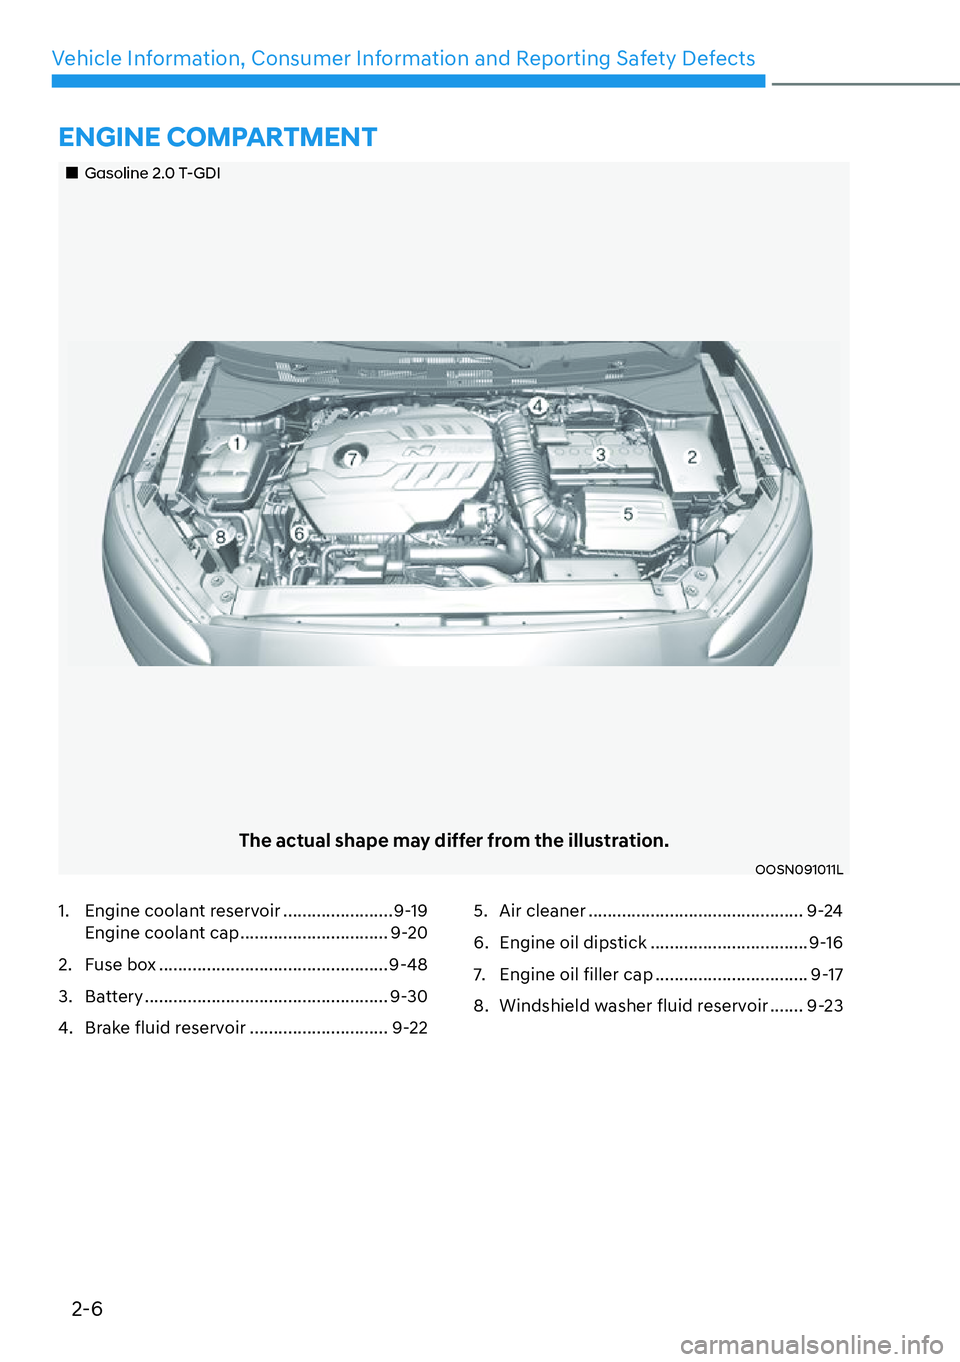 HYUNDAI KONA 2023 User Guide 2-6
Vehicle Information, Consumer Information and Reporting Safety Defects
��„Gasoline 2.0 T-GDI
The actual shape may differ from the illustration.
OOSN091011L
1.  Engine coolant reservoir ........